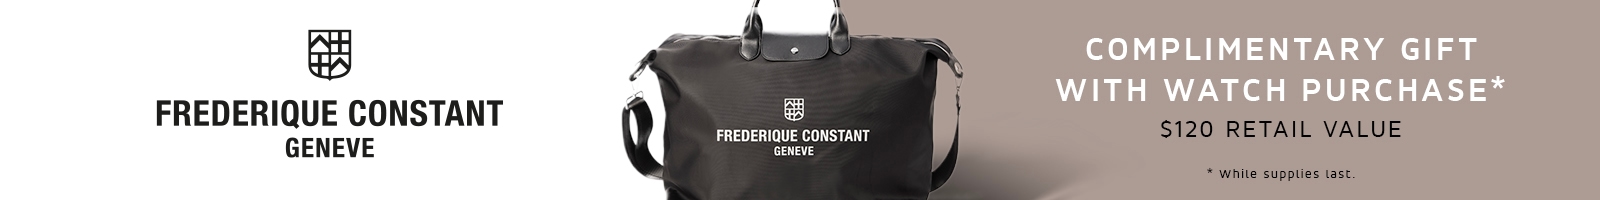 Free tote bag with any Frederique Constant watch purchase, $120 value, while supplies last